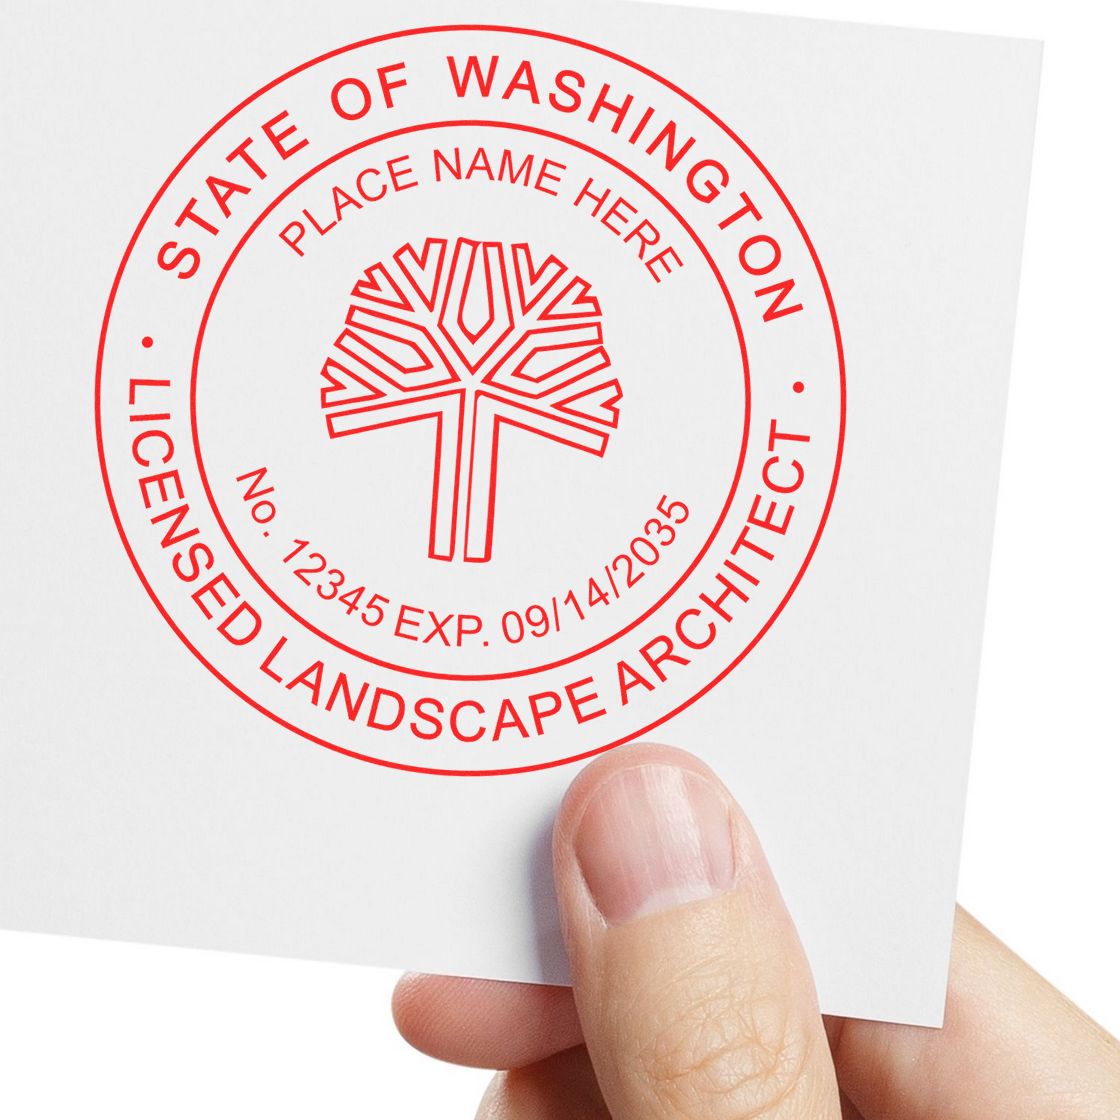 The Washington Landscape Architectural Seal Stamp stamp impression comes to life with a crisp, detailed photo on paper - showcasing true professional quality.